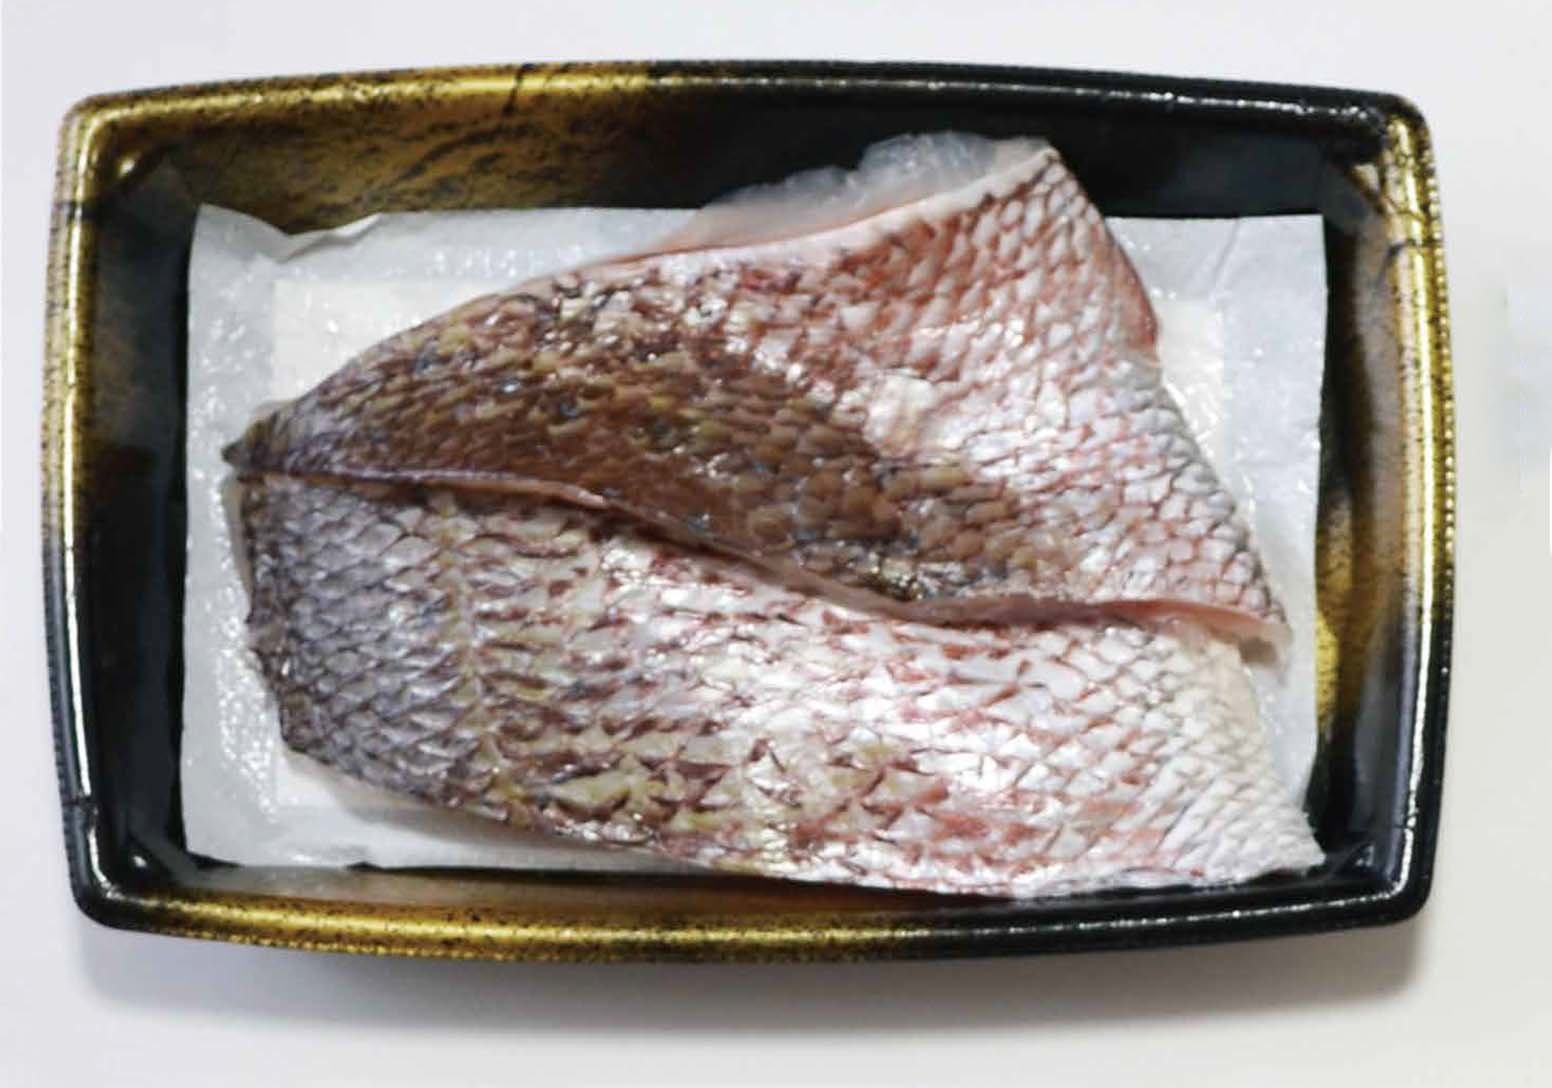 Demi designed food absorbent pad to absorb excess moisture for cut fish fillets